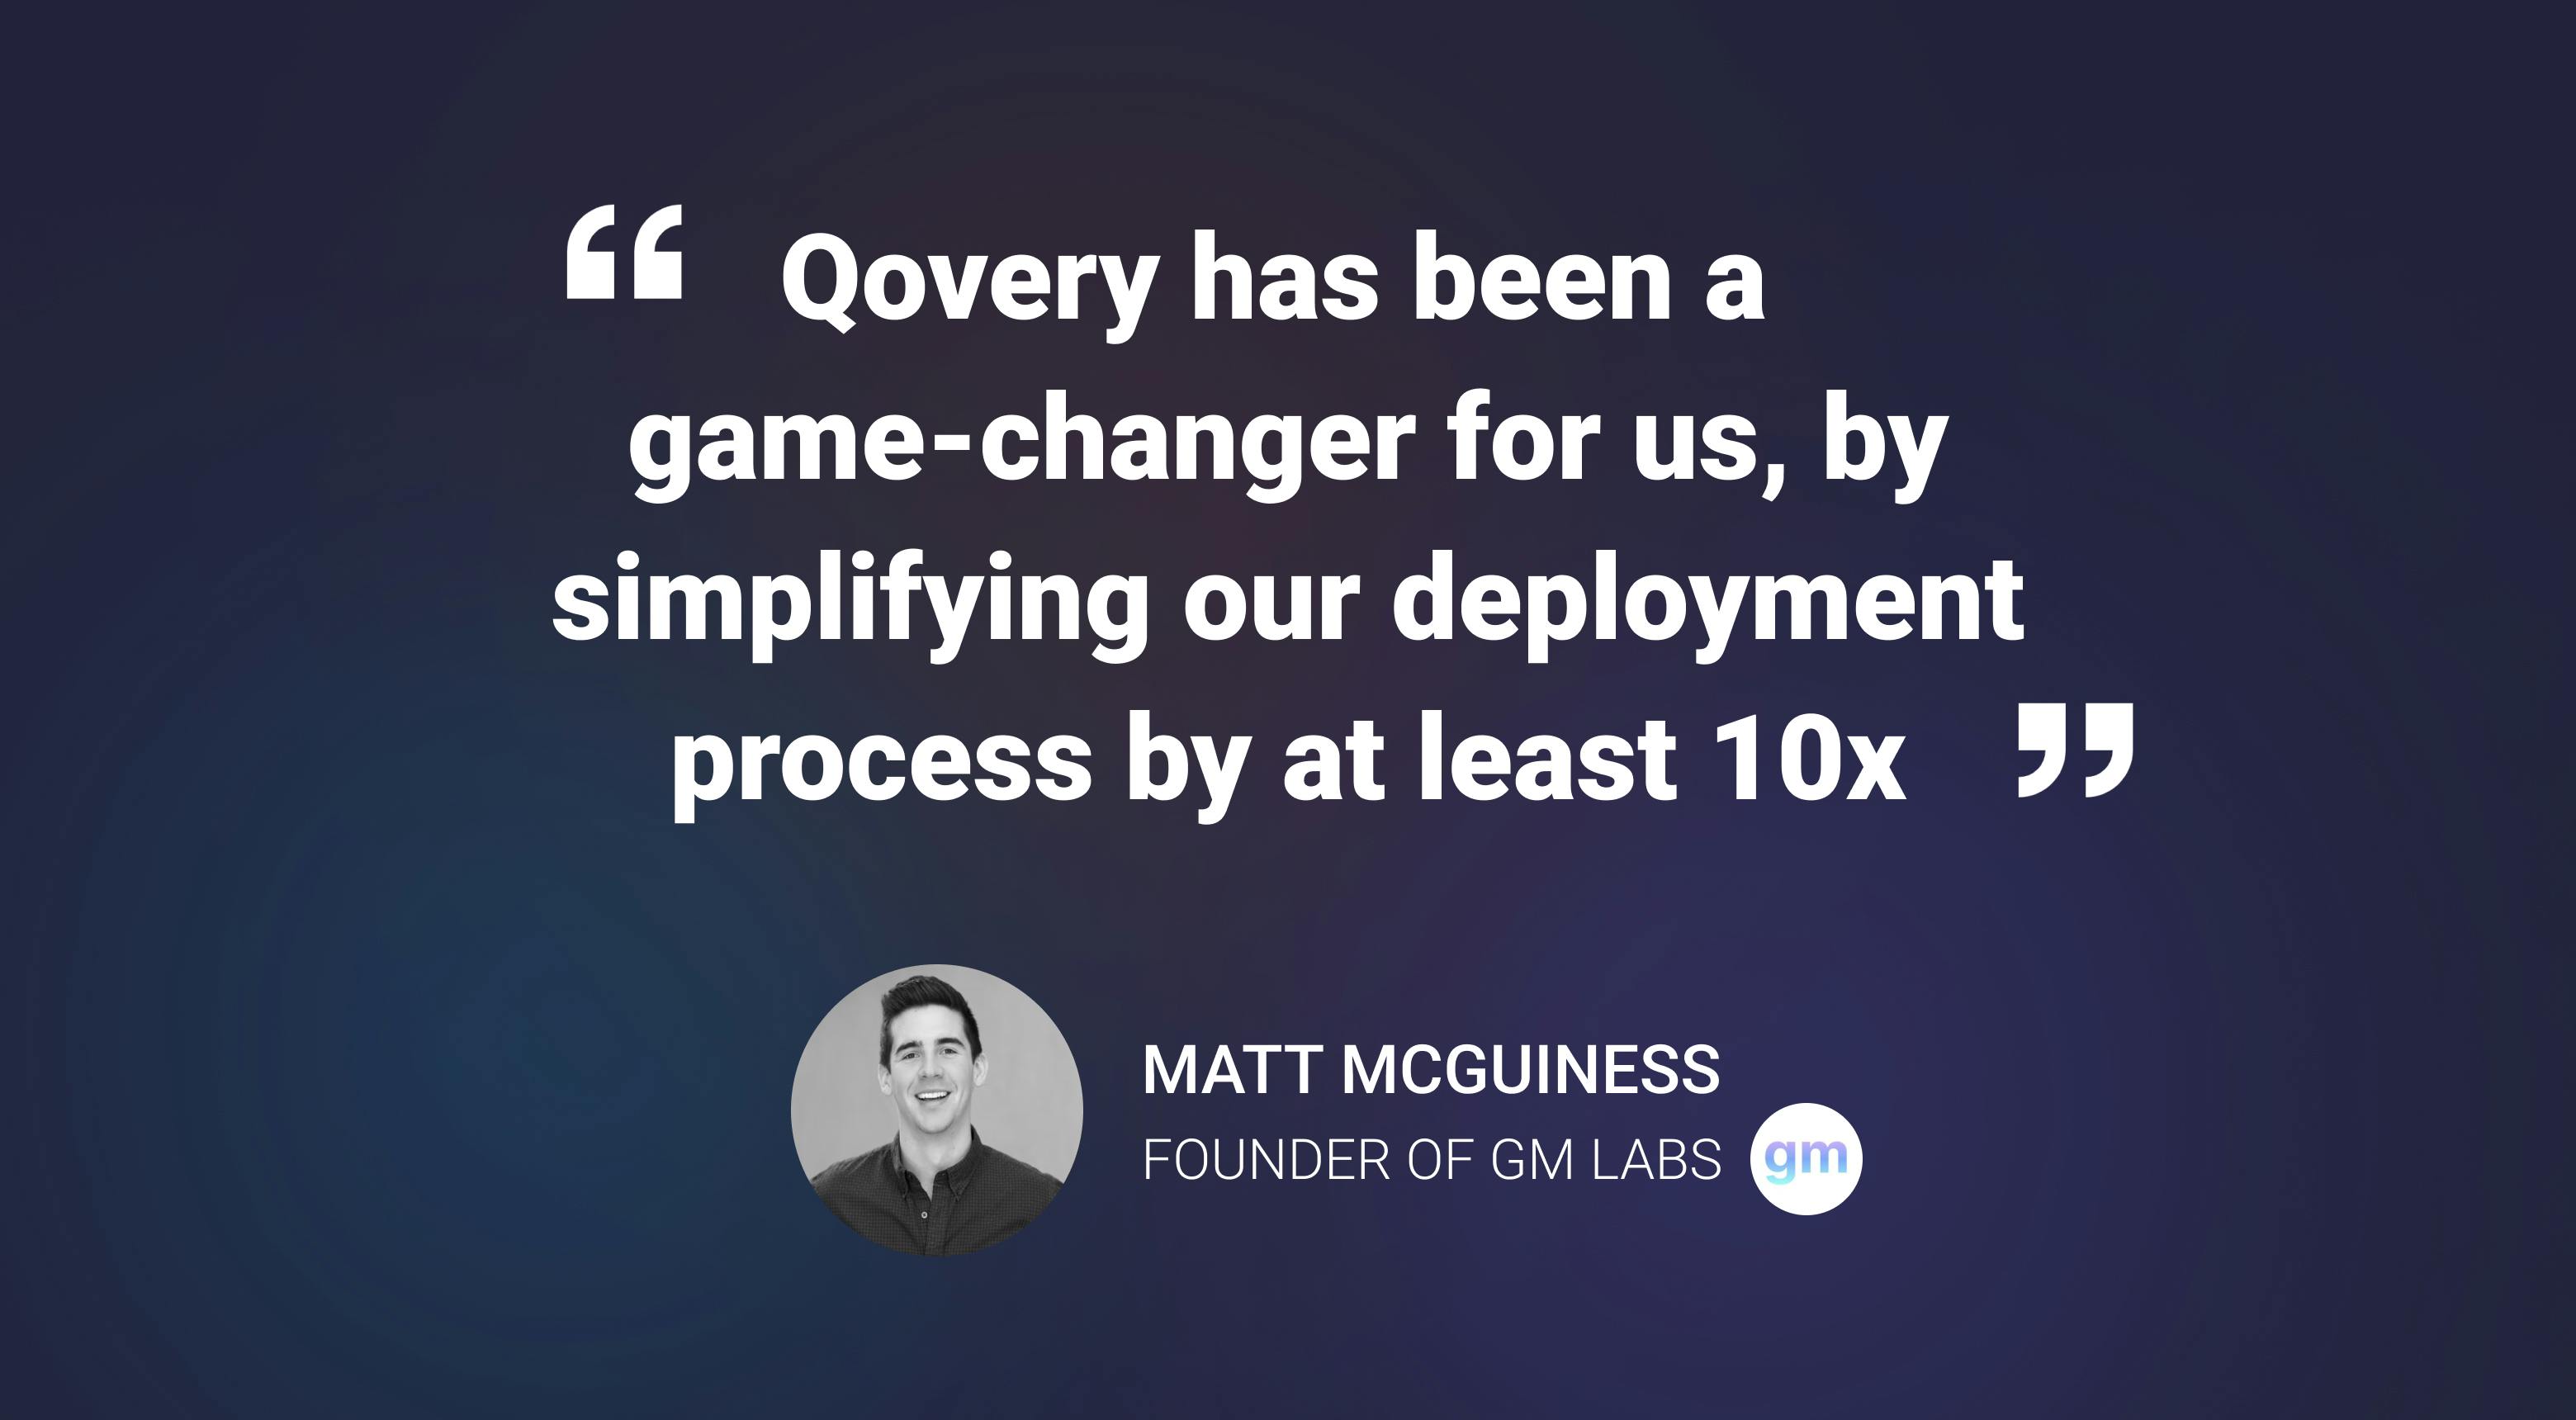 Introducing the Qovery Perks Program for Startups